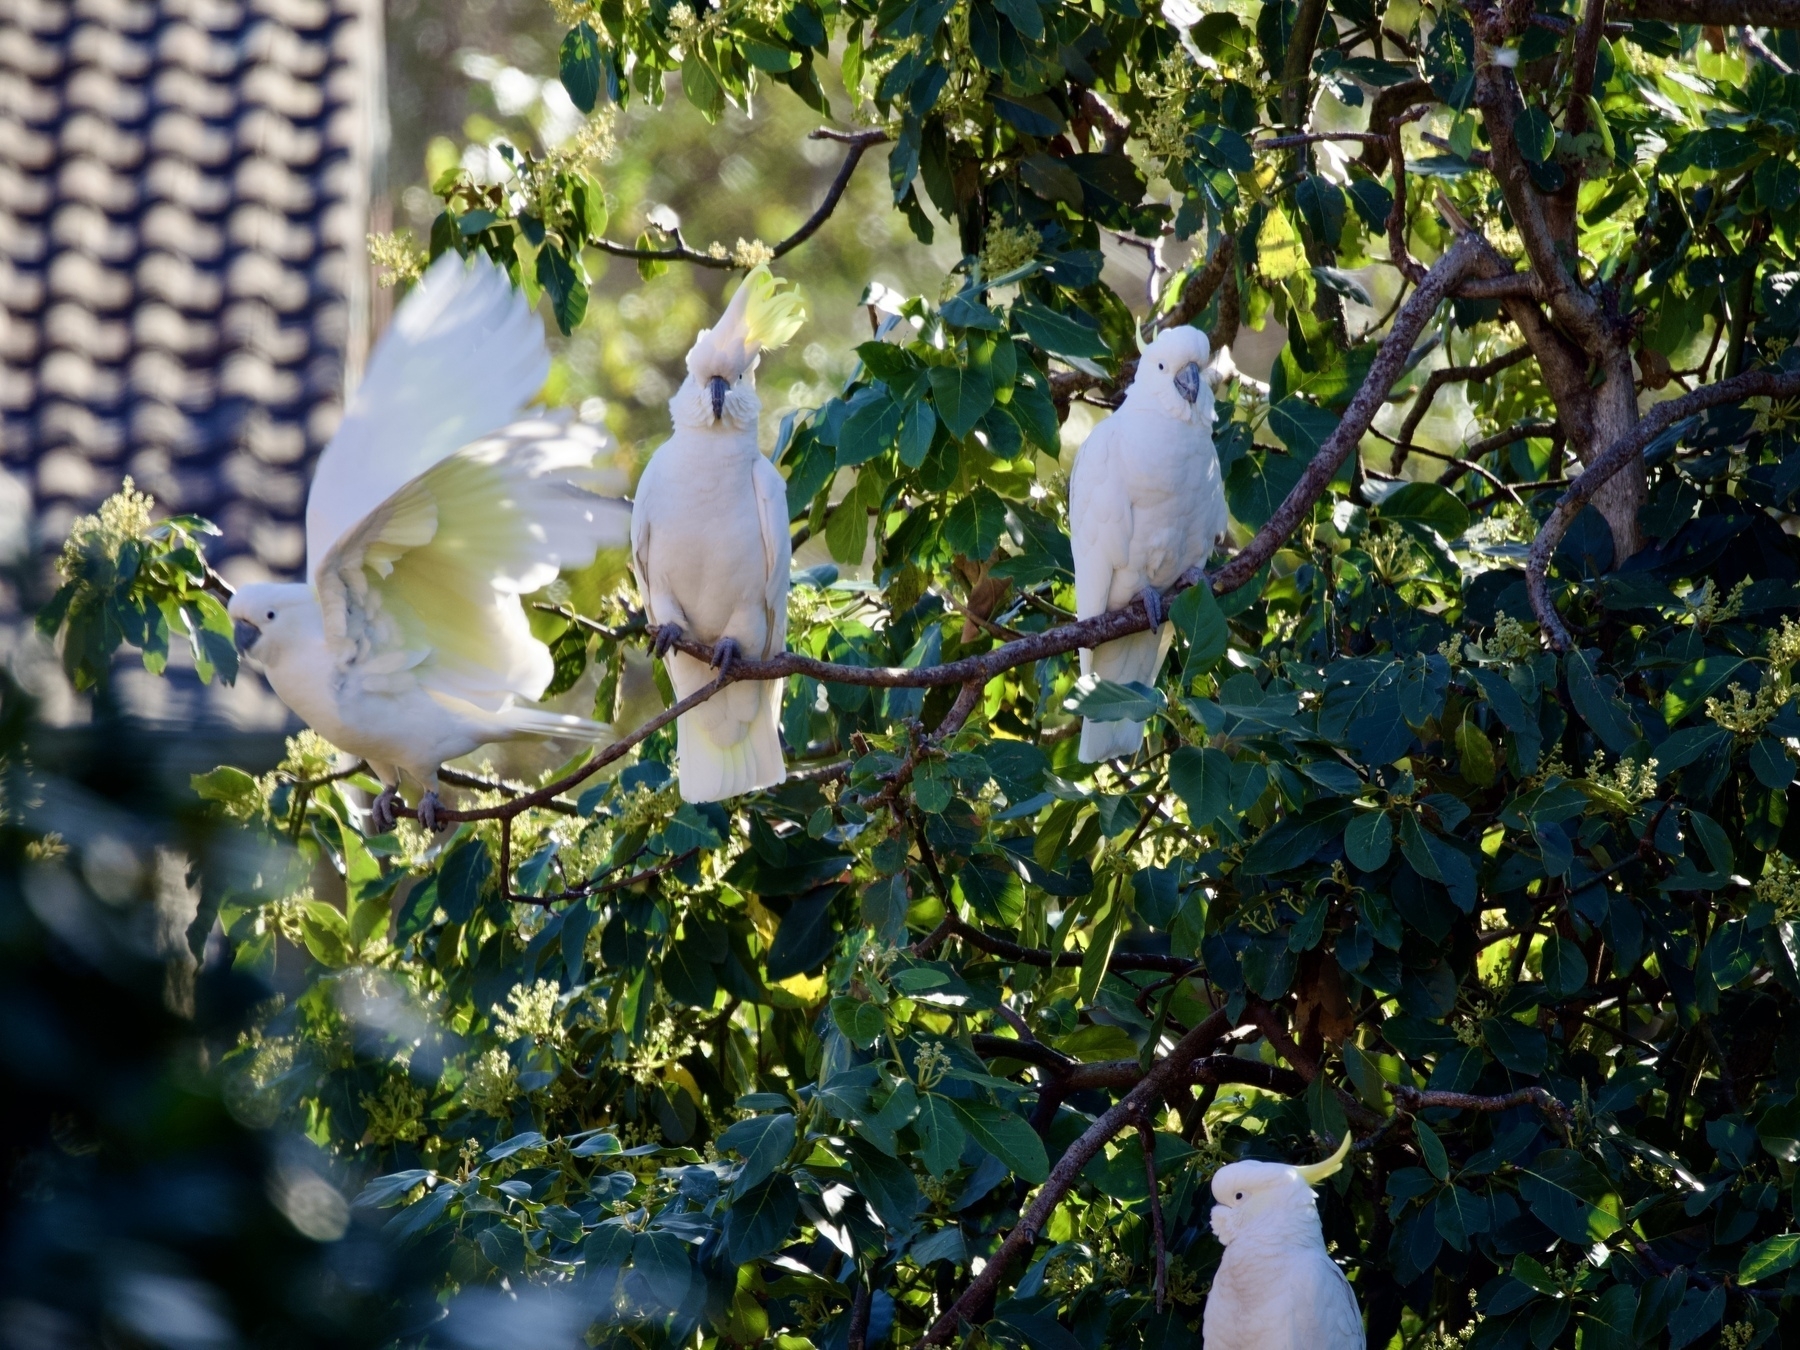 Three cockatoos sit in a tree while one frantically flies away.